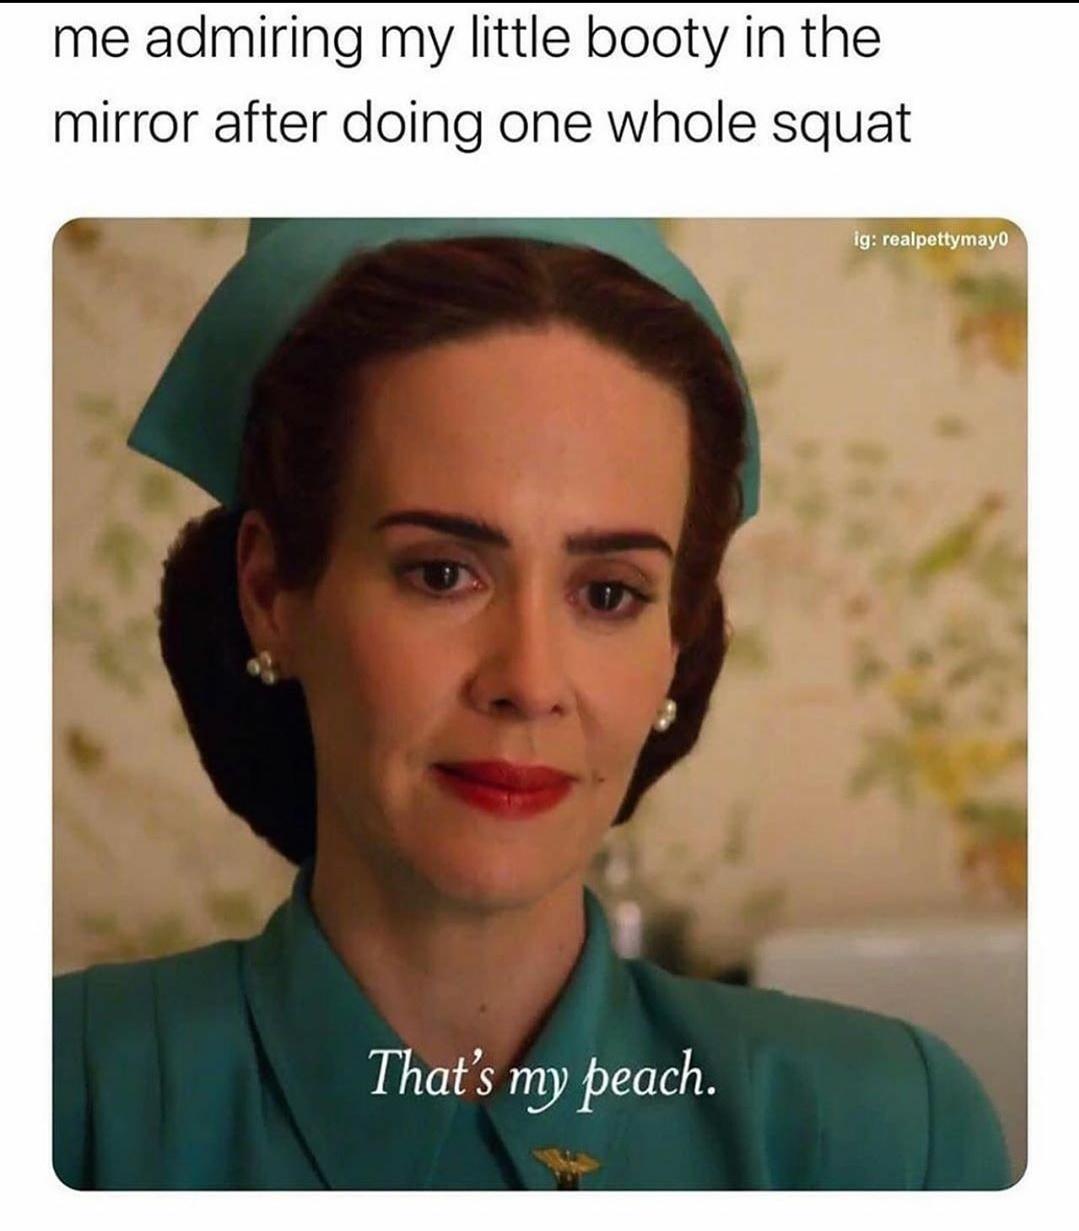 smile - me admiring my little booty in the mirror after doing one whole squat ig realpettymayo That's my peach.